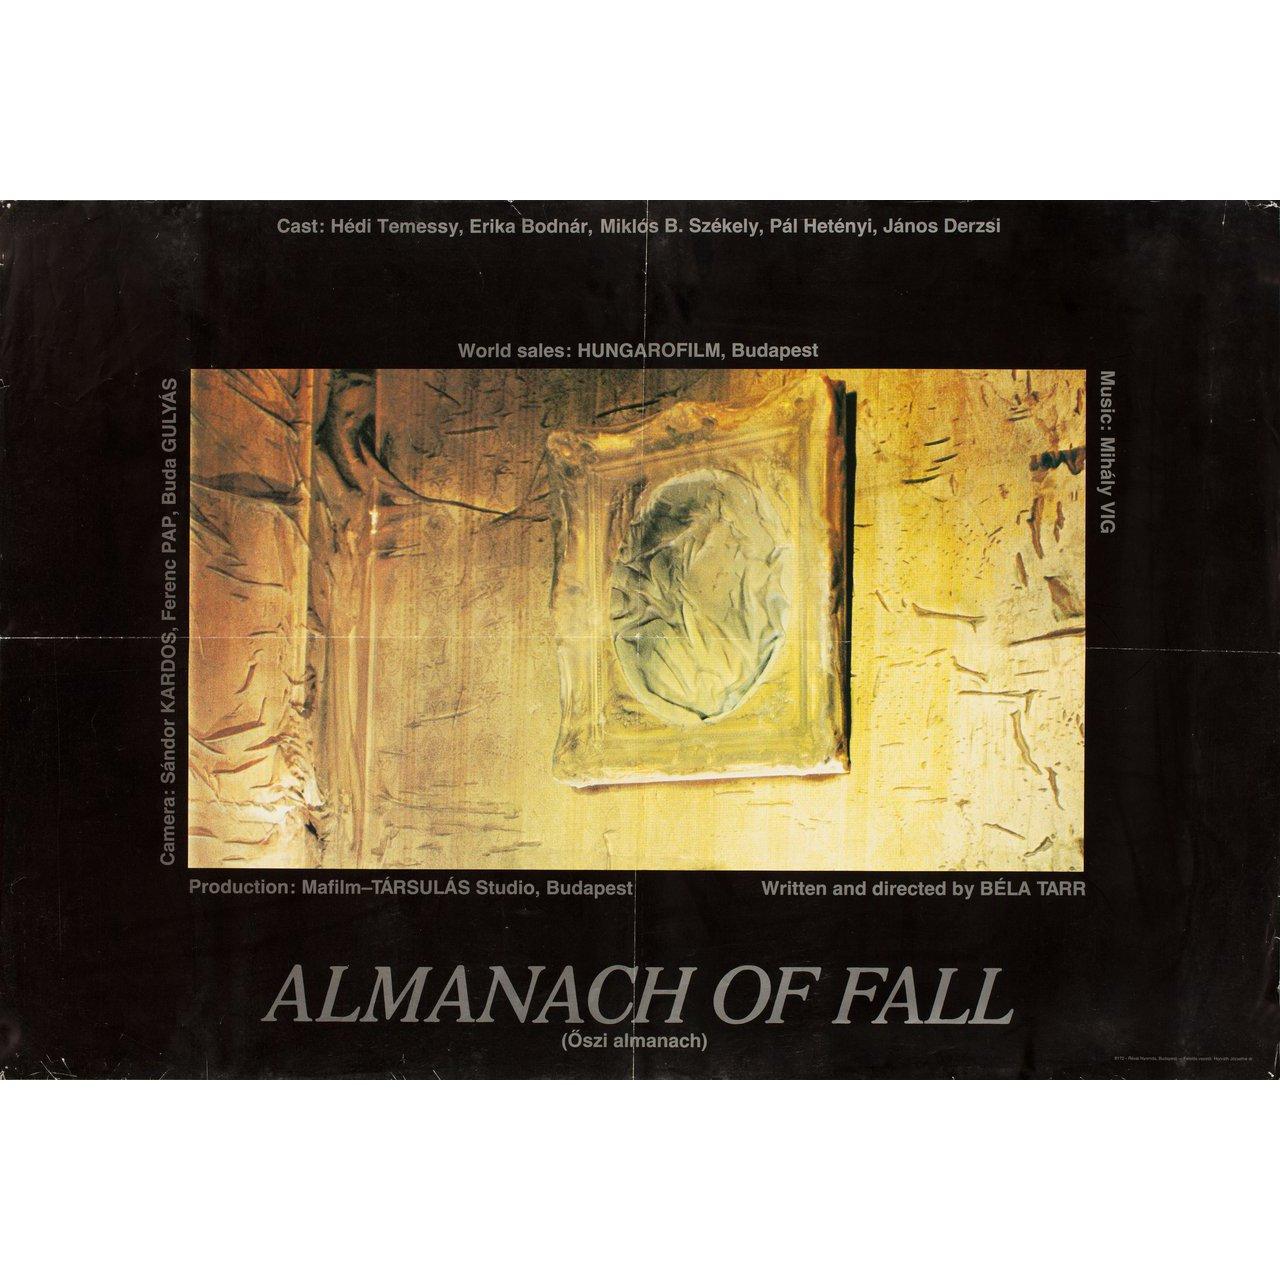 Original 1984 Hungarian A1 poster for the film Almanac of Fall (Oszi Almanach) directed by Bela Tarr with Hedi Temessy / Erika Bodnar / Miklos Szekely B.. Very Good condition, folded with pinholes. Many original posters were issued folded or were